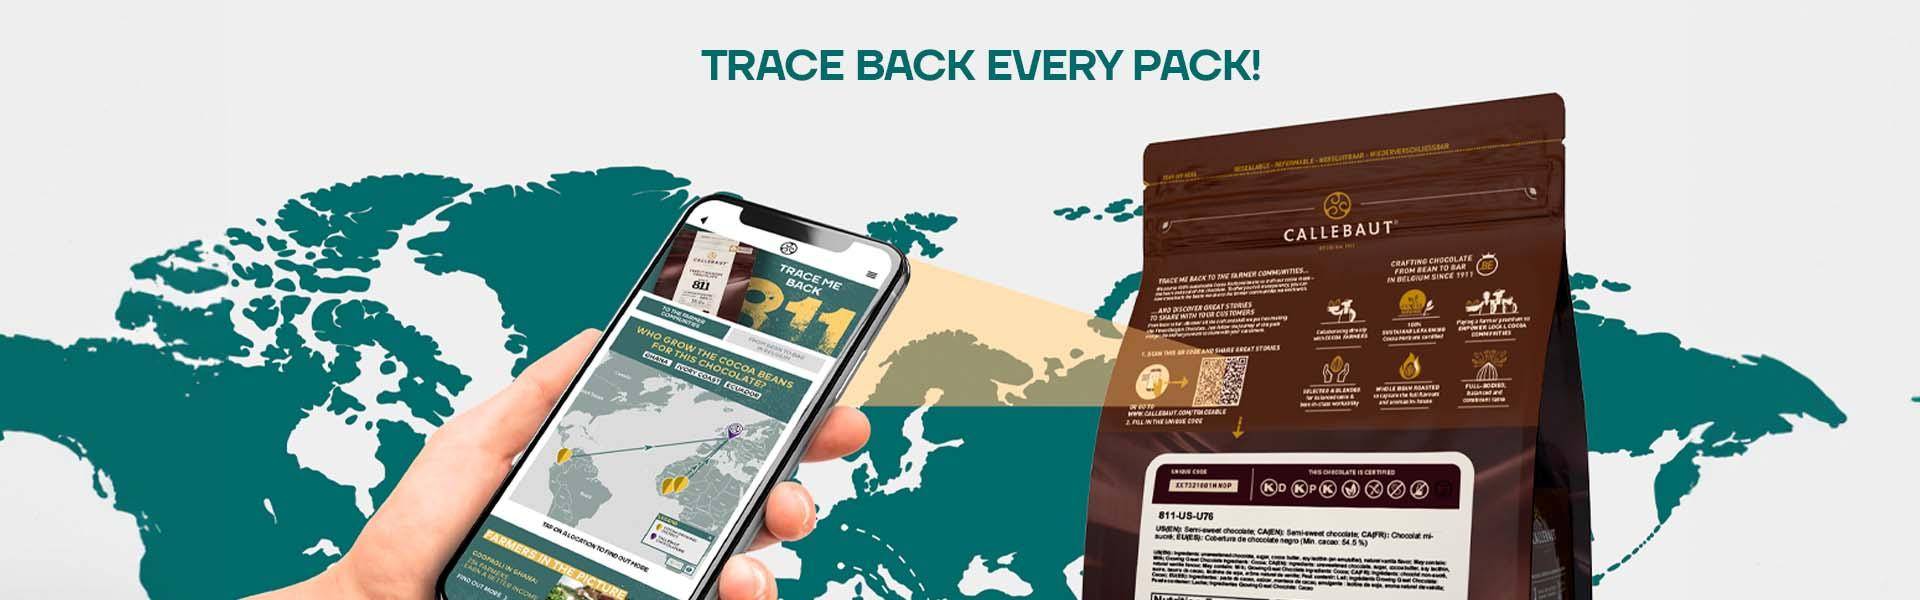 TRACE BACK EVERY PACK!